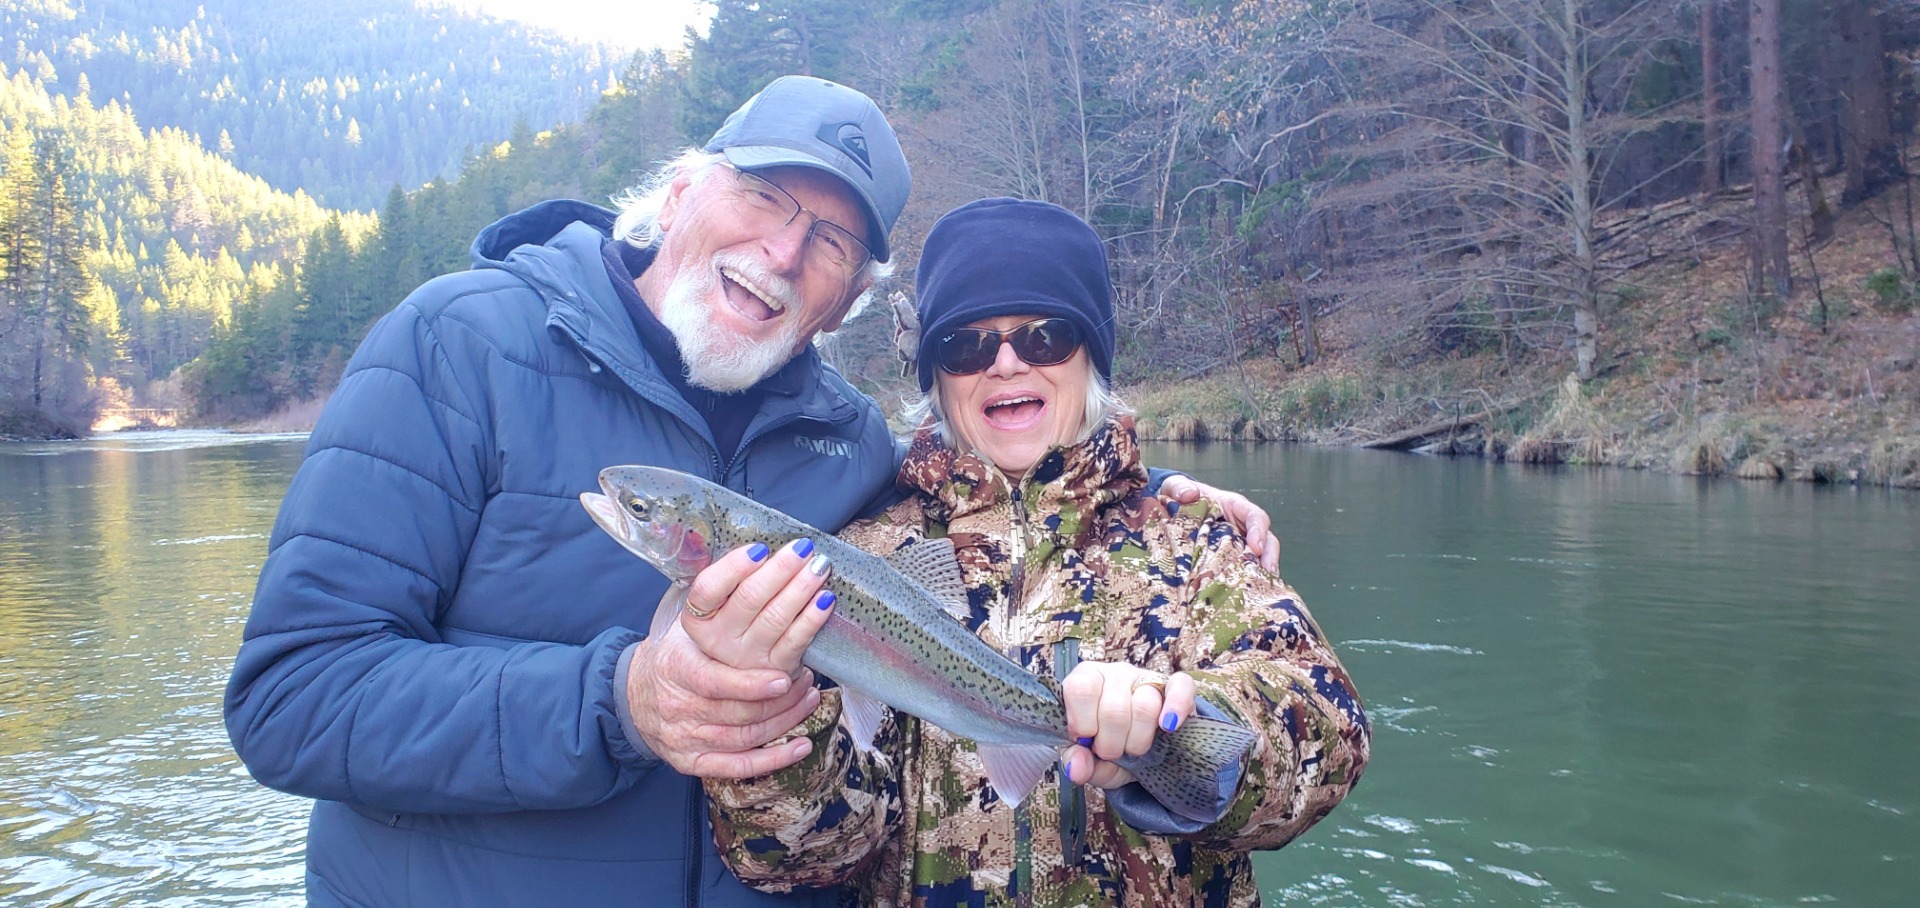 Klamath River action - Cathy lands her first Steely